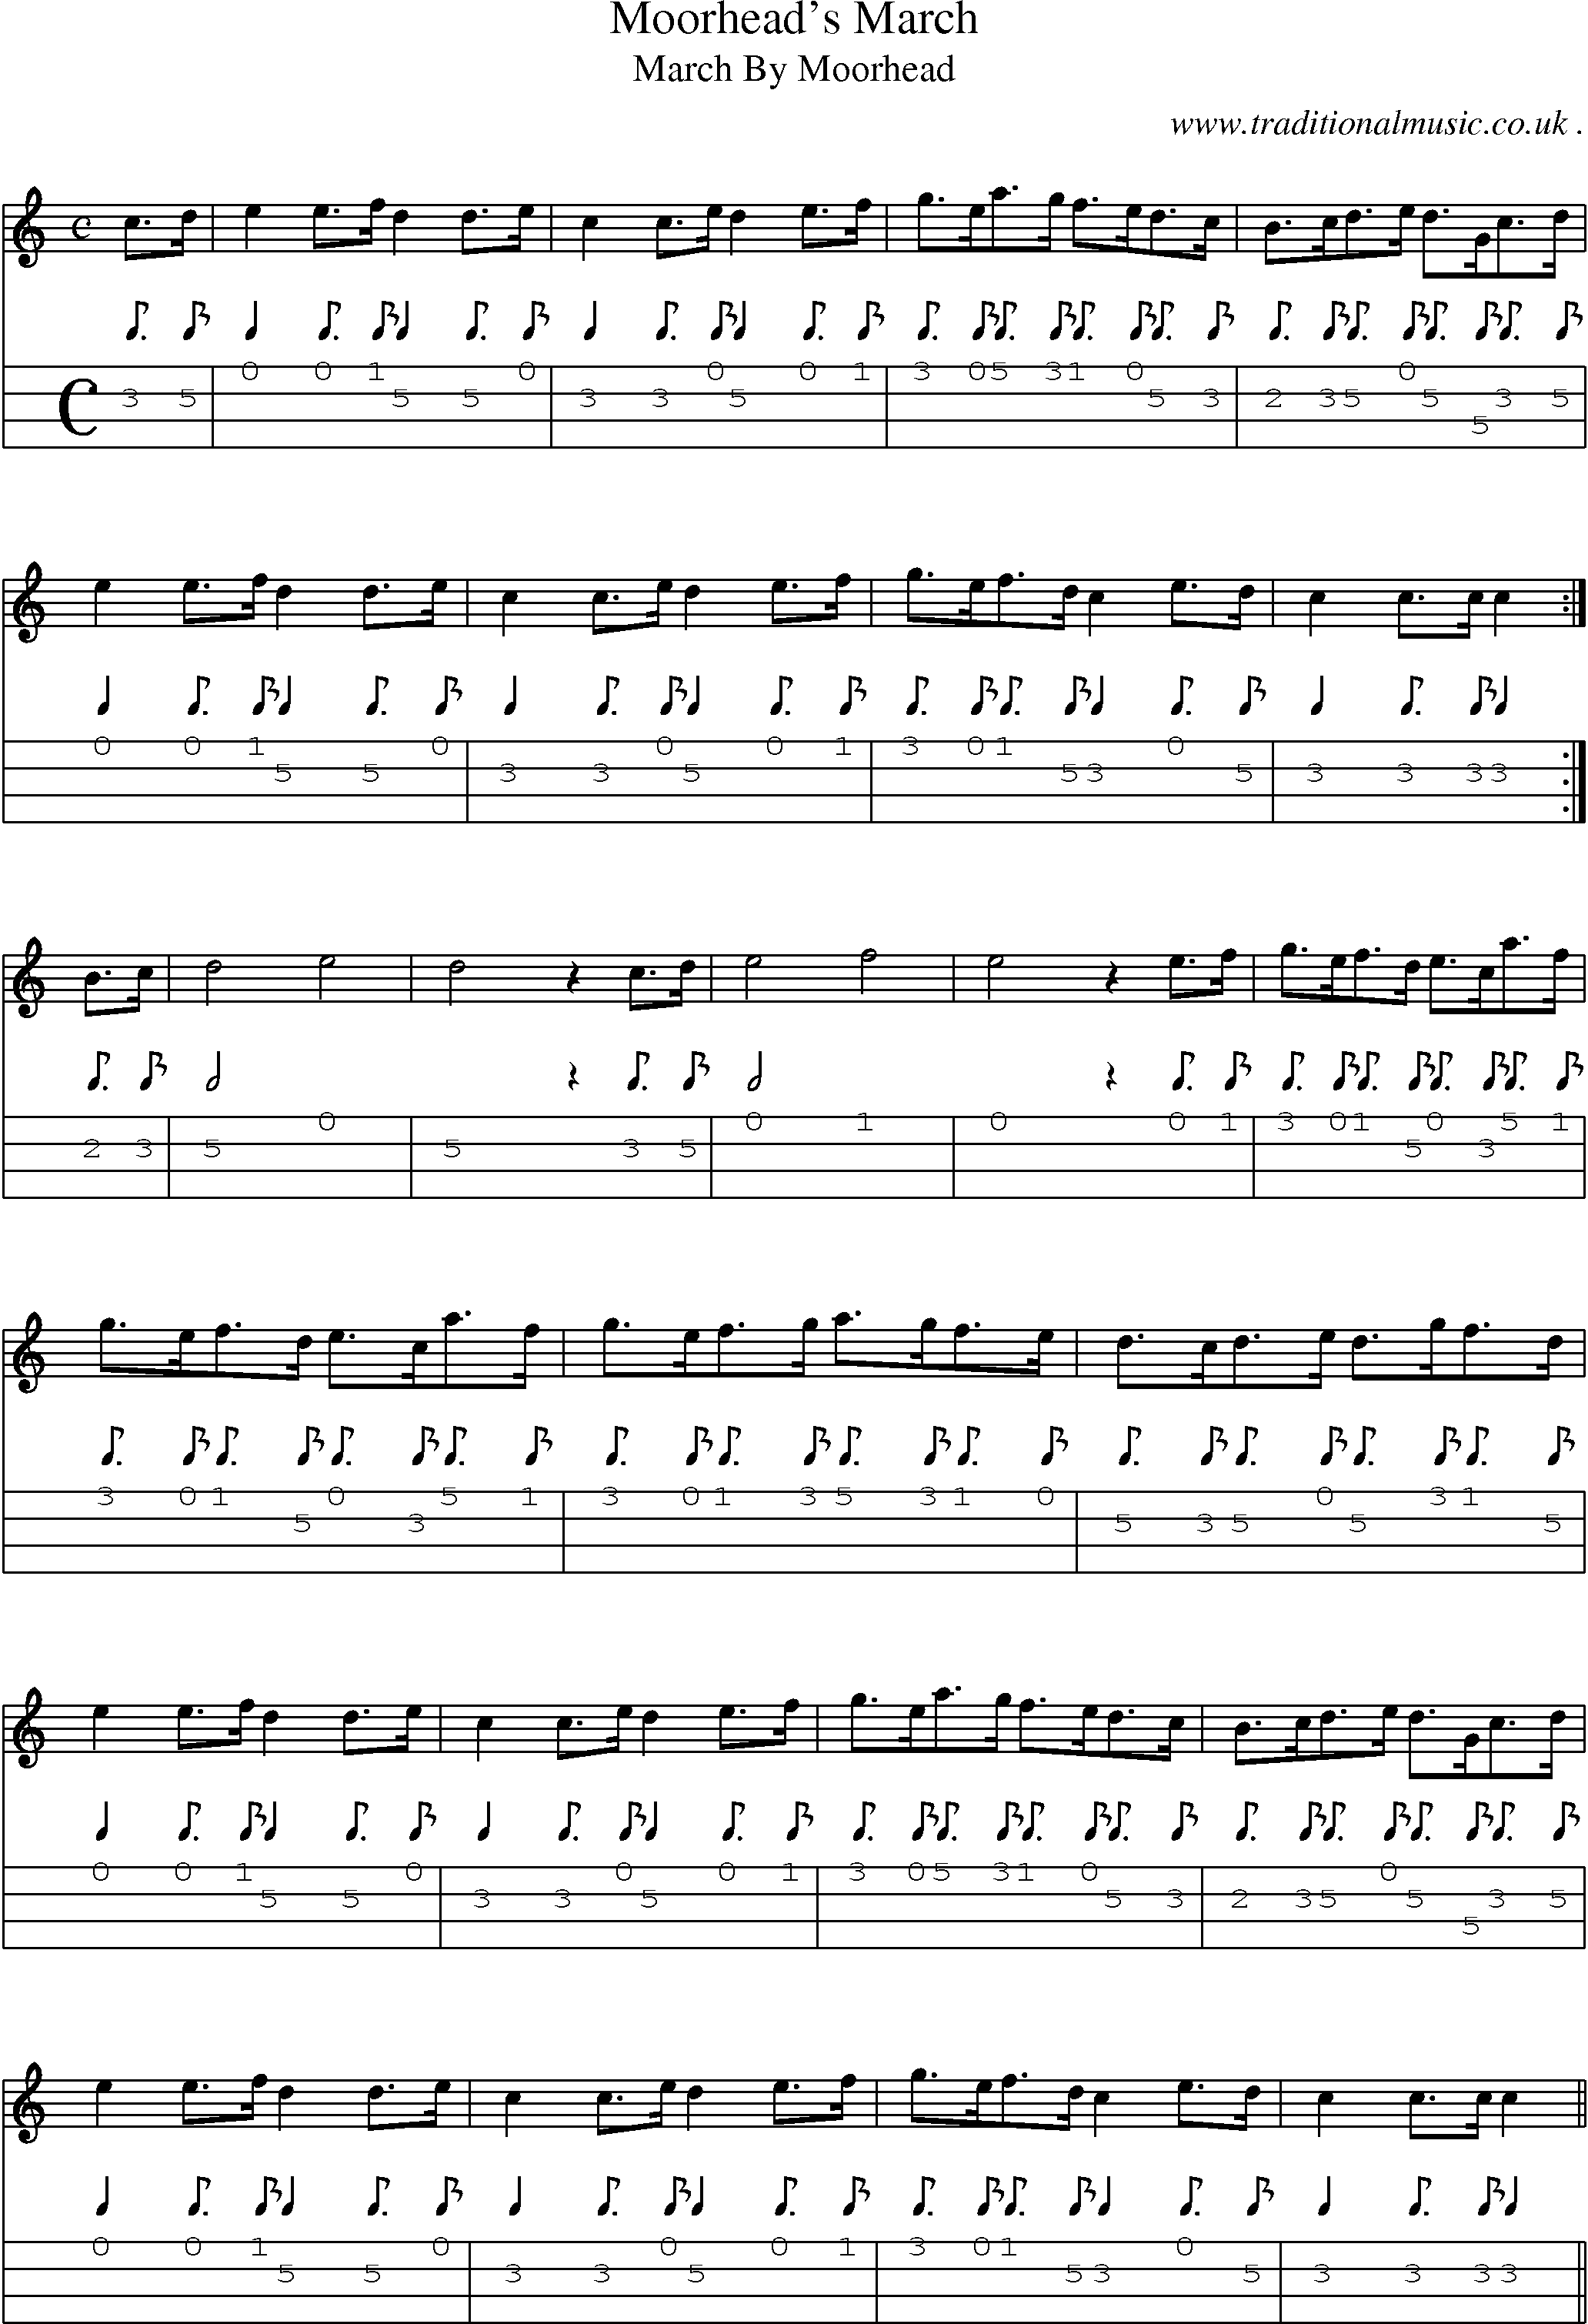 Sheet-Music and Mandolin Tabs for Moorheads March